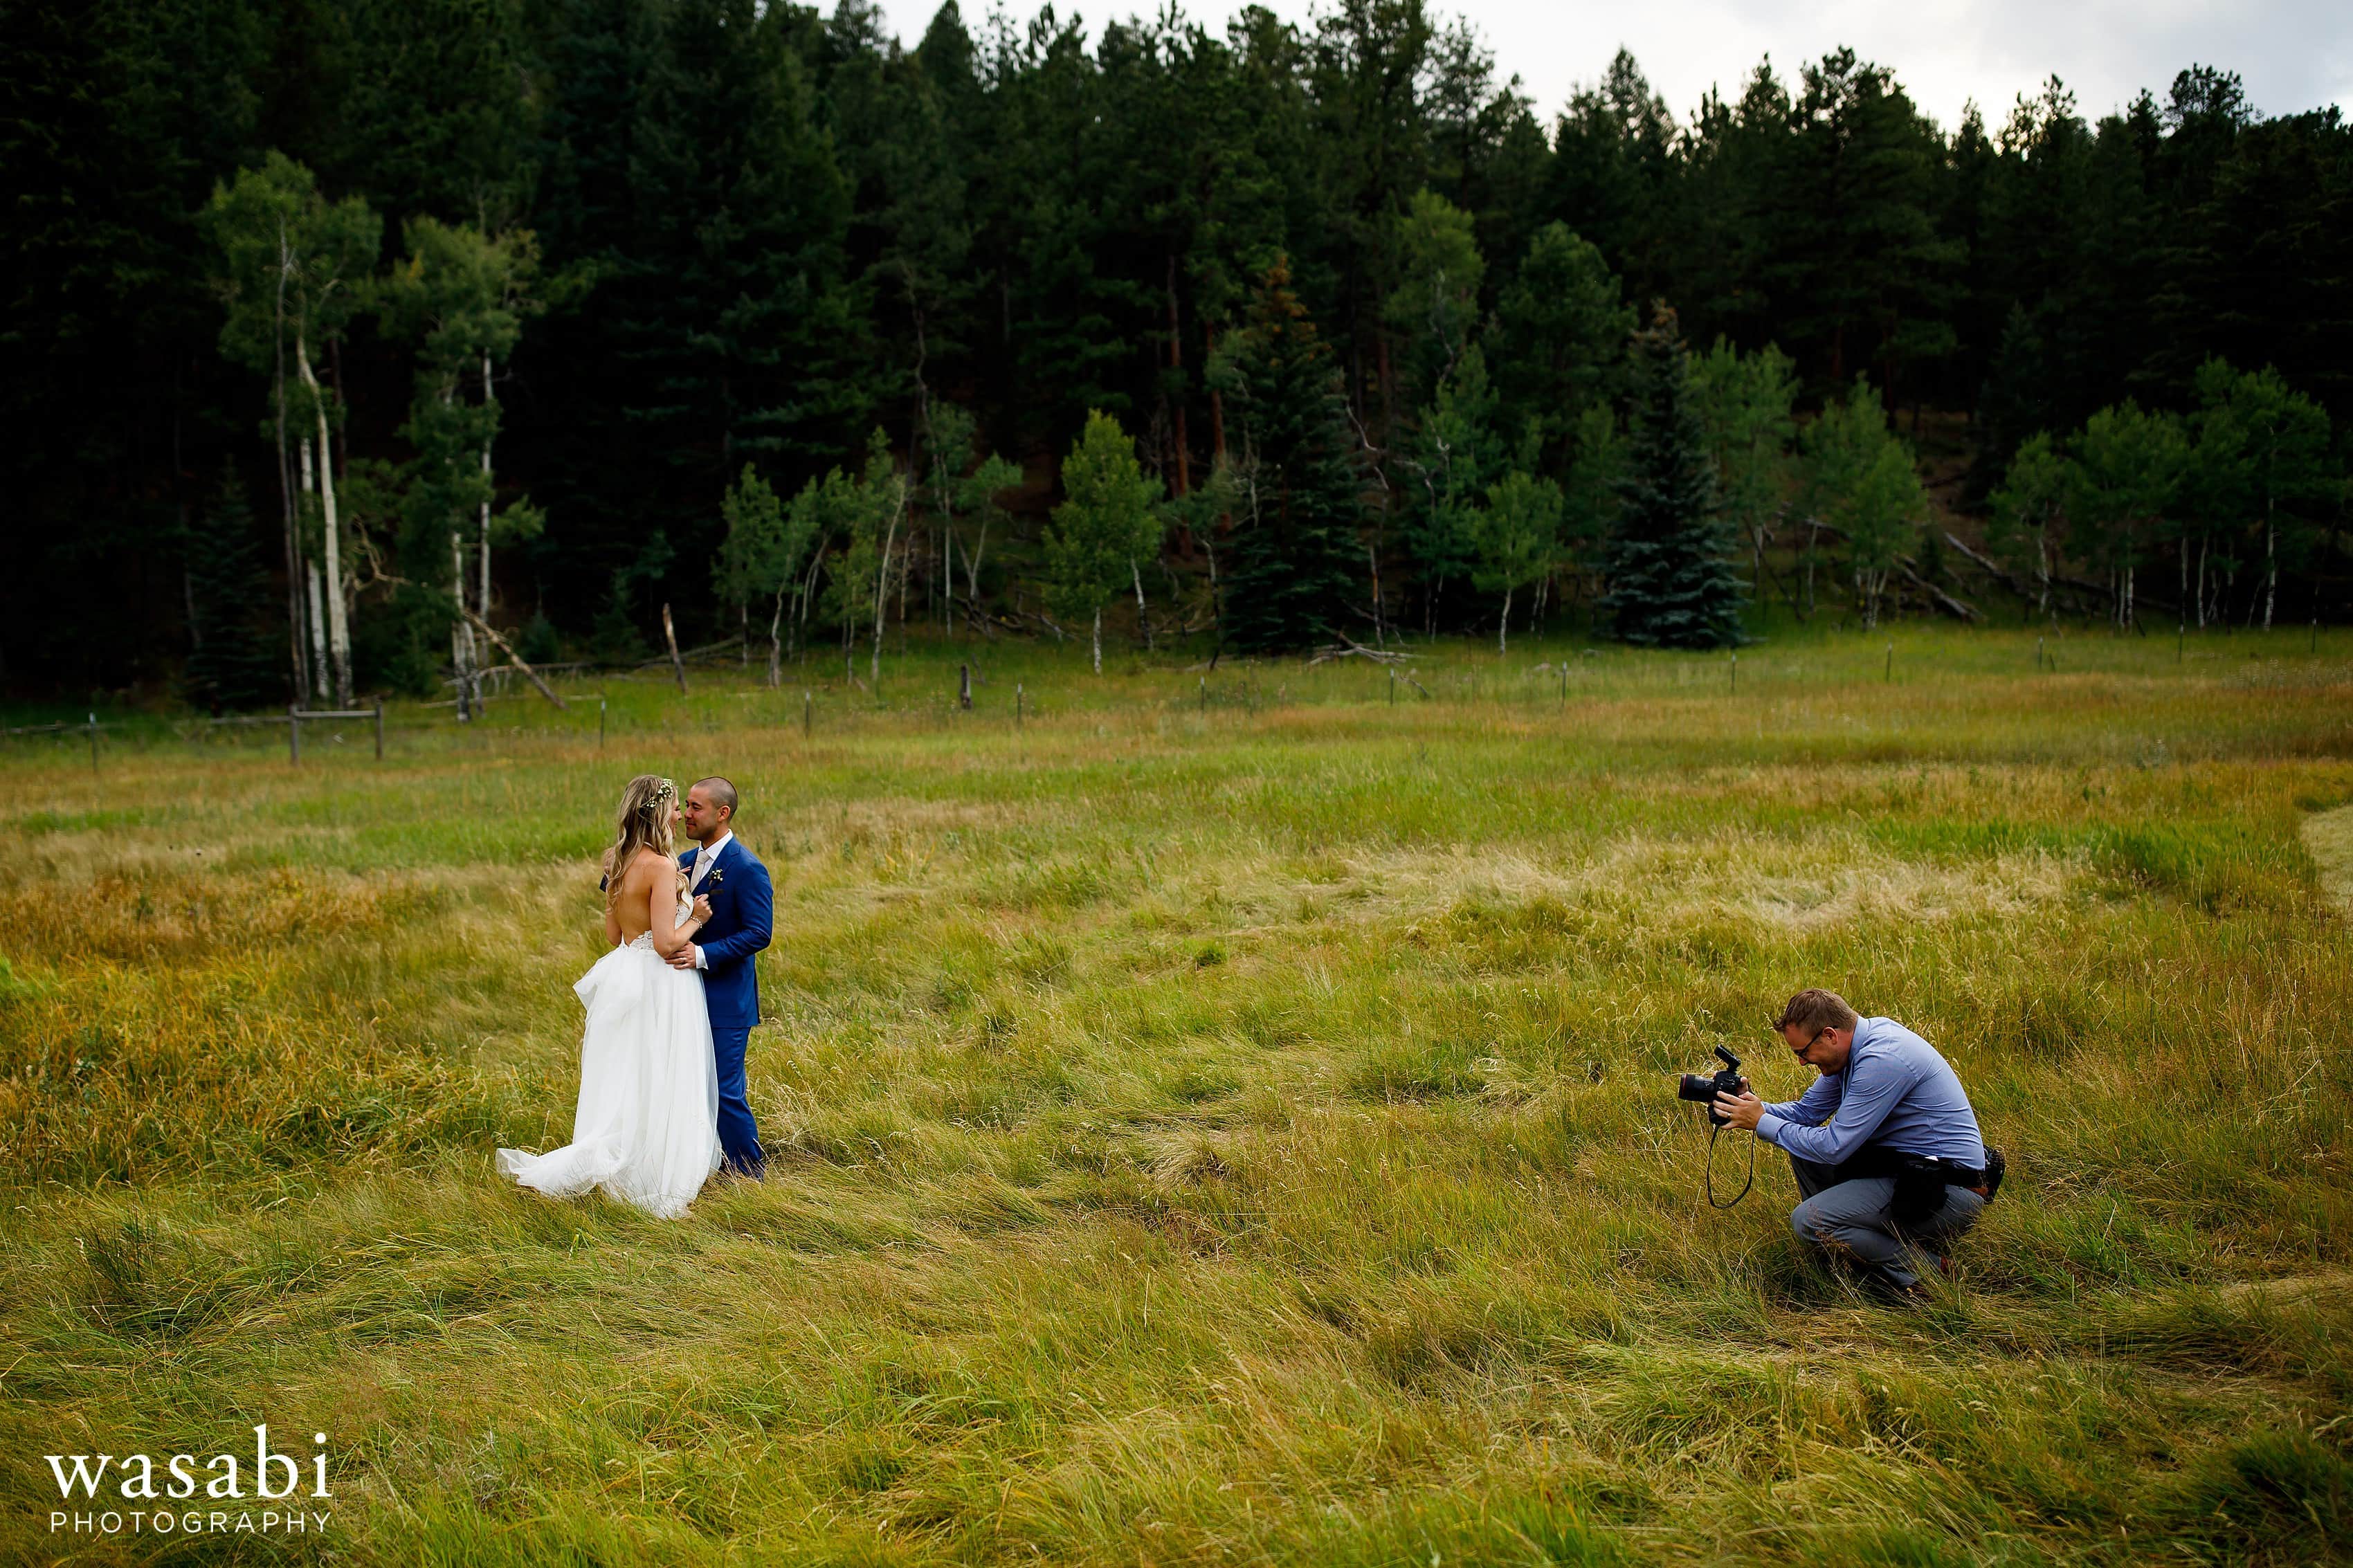 A Behind the Scenes look back at Wasabi Photography's 2018 wedding with photos of our team going above and beyond to make the best images for our couples!